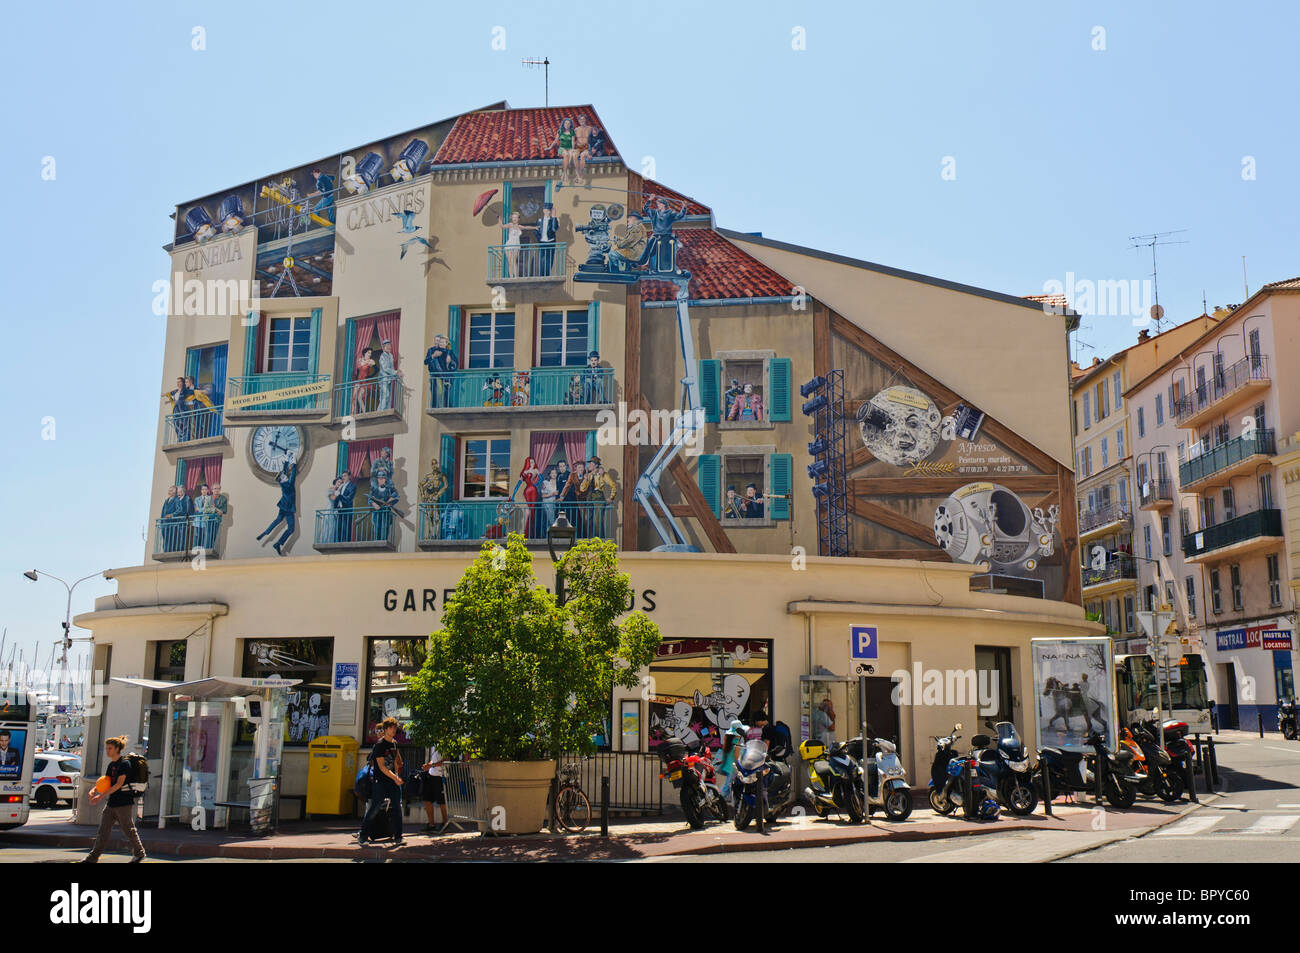 Cinematographic mural on a building in Cannes Stock Photo